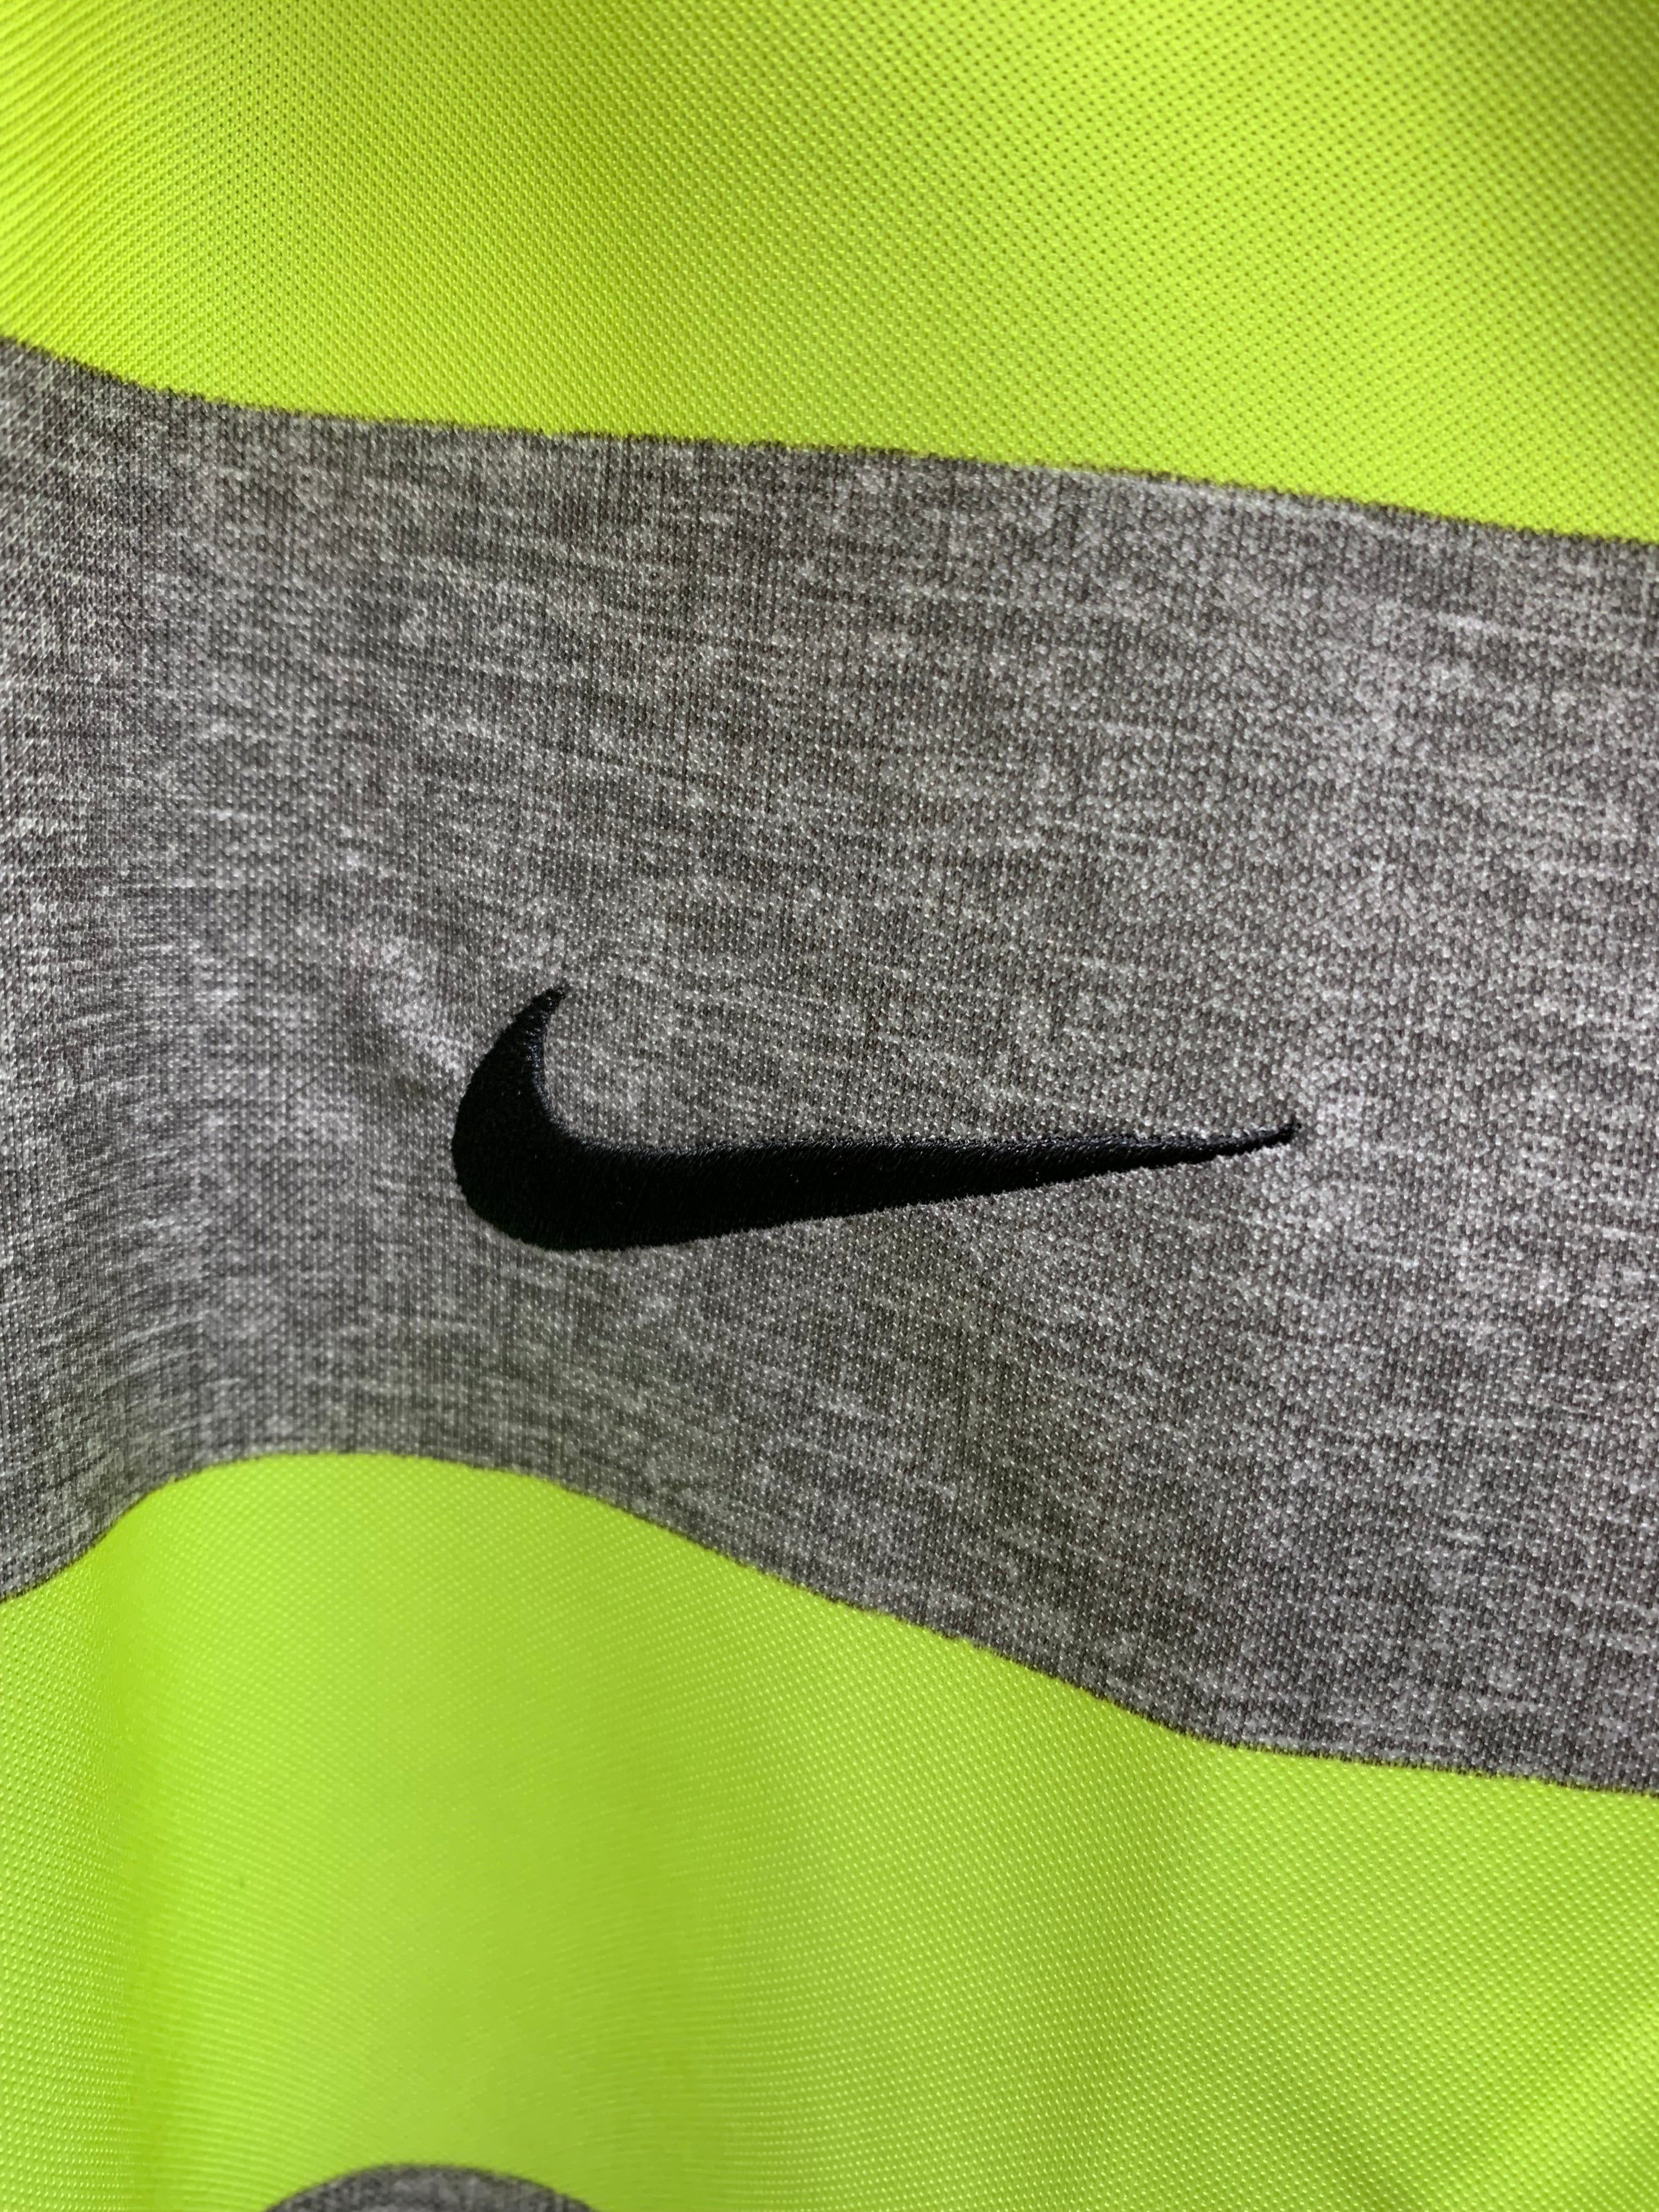 Men's Nike Dry Fit / Stay Cool Golf Shirt